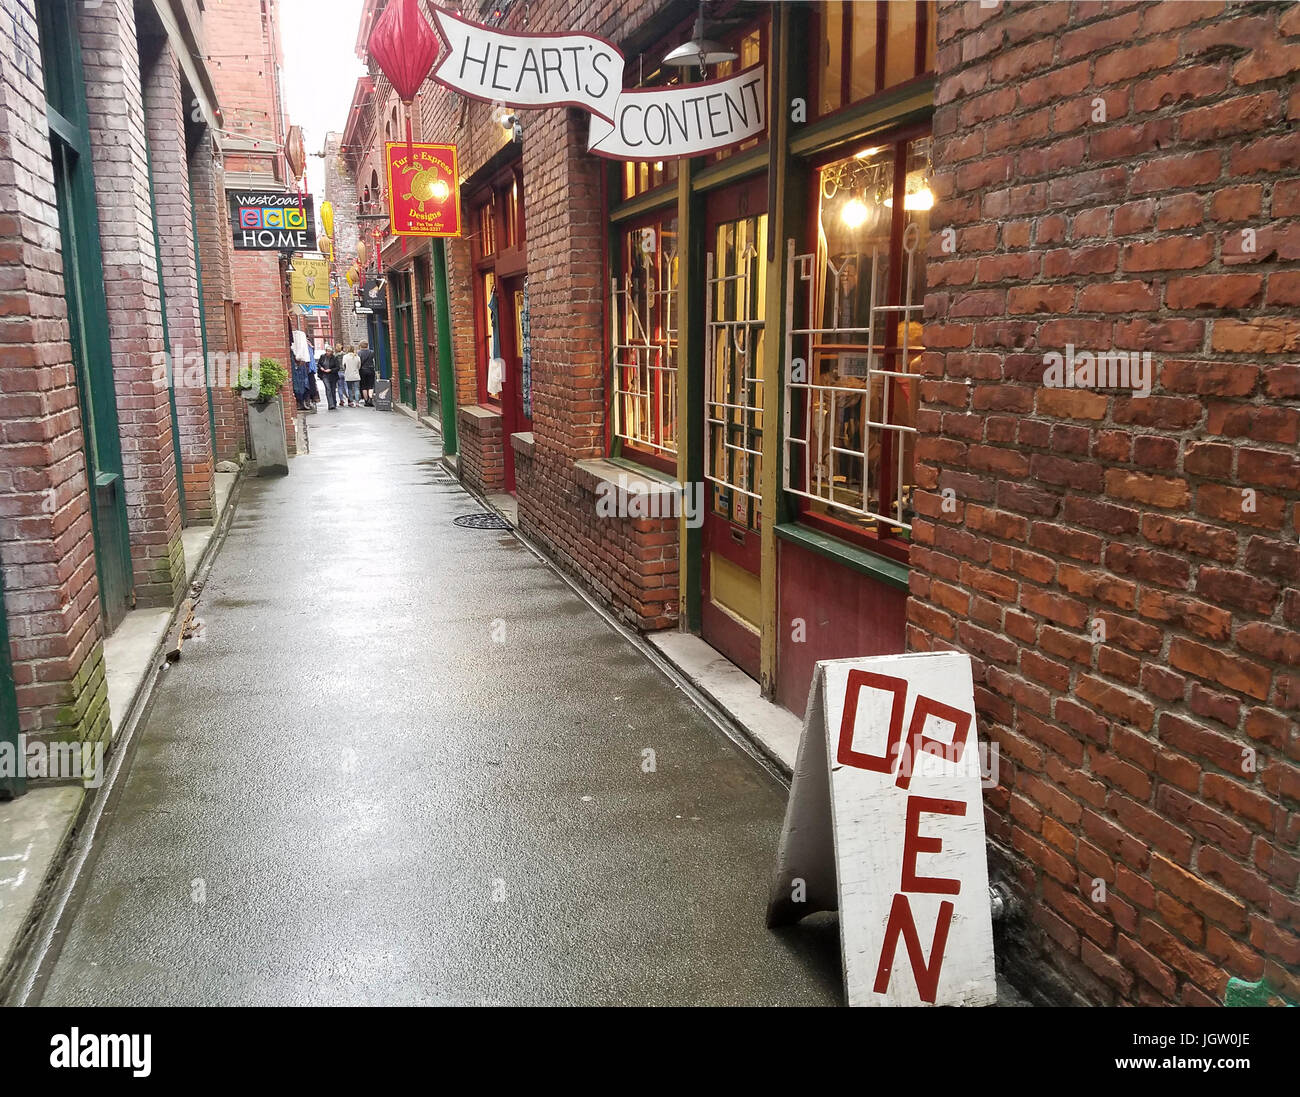 Fan Tan Alley, originally Victoria Chinatown's opium den and center of gambling. Now it's lined with tourist shops. The alley is only 3 1/2 feet (a me Stock Photo